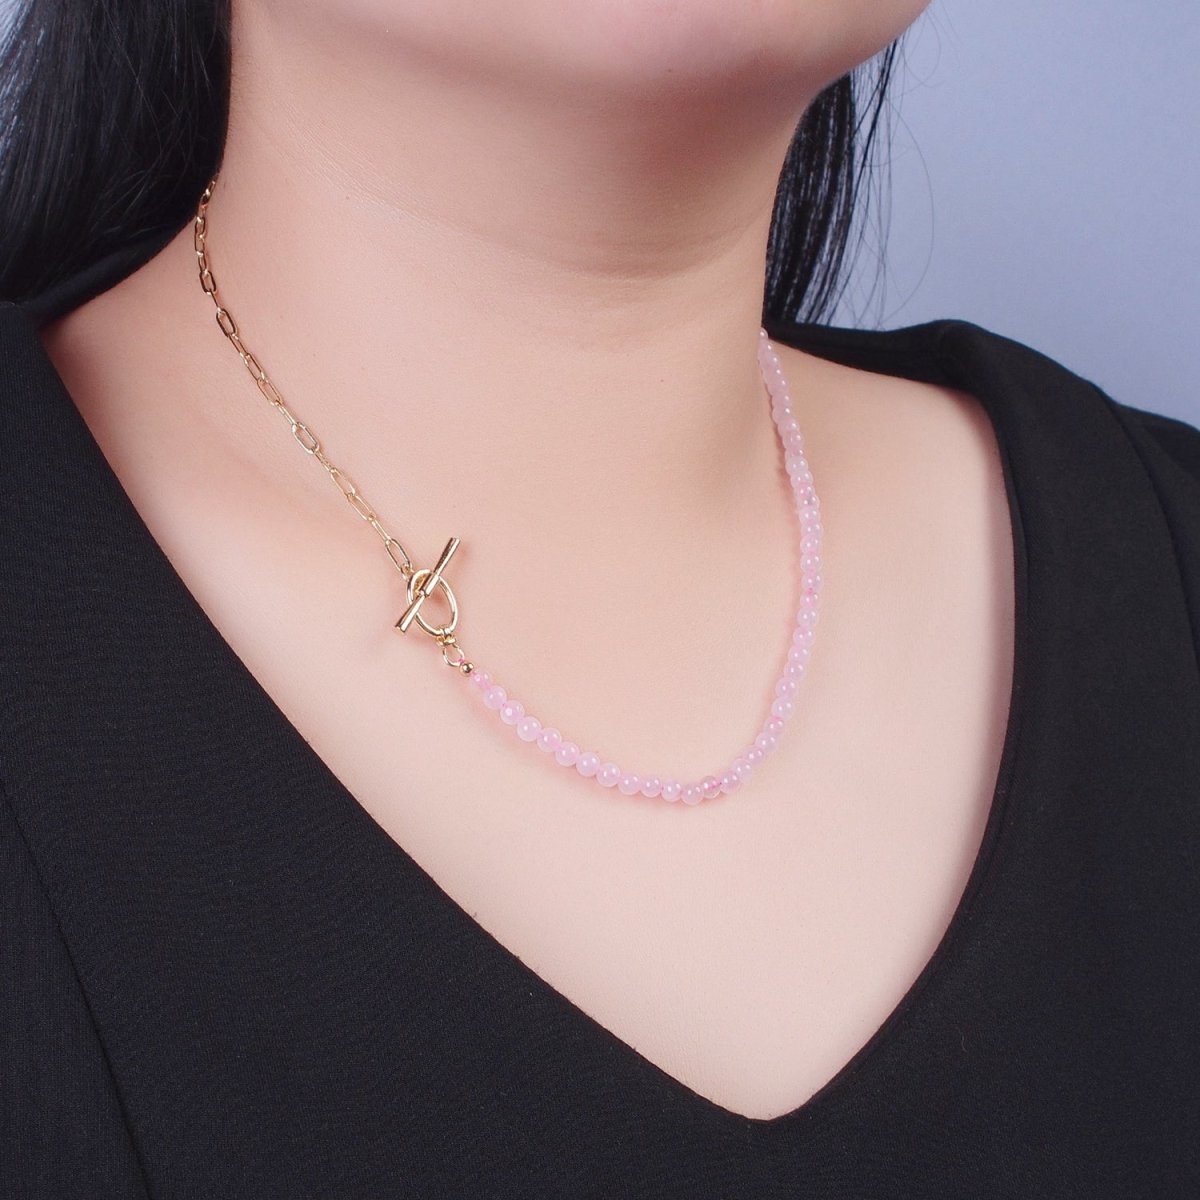 Dainty Half Bead Half Link Chain Necklace, 24k Gold Filled Paperclip Chain with Pink Quartz Necklace with Oval Toggle Clasps | WA-1019 Clearance Pricing - DLUXCA